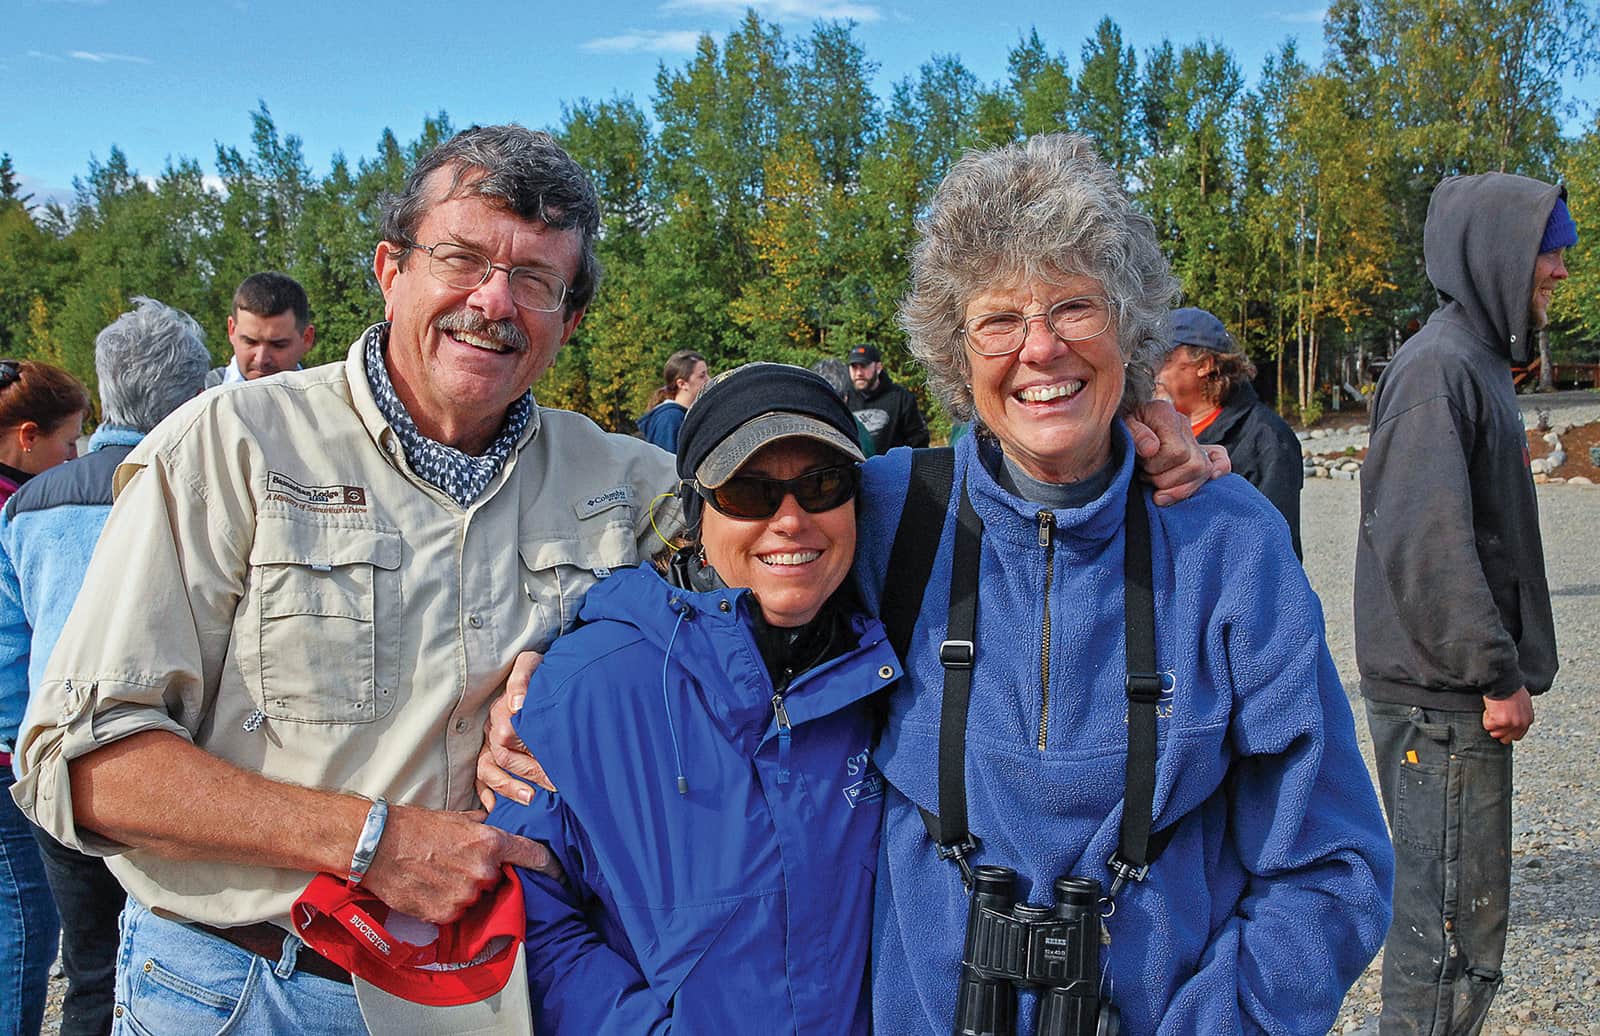 Three smiling people pose for a photograph outdoors on a sunny day, with bystanders in the background.